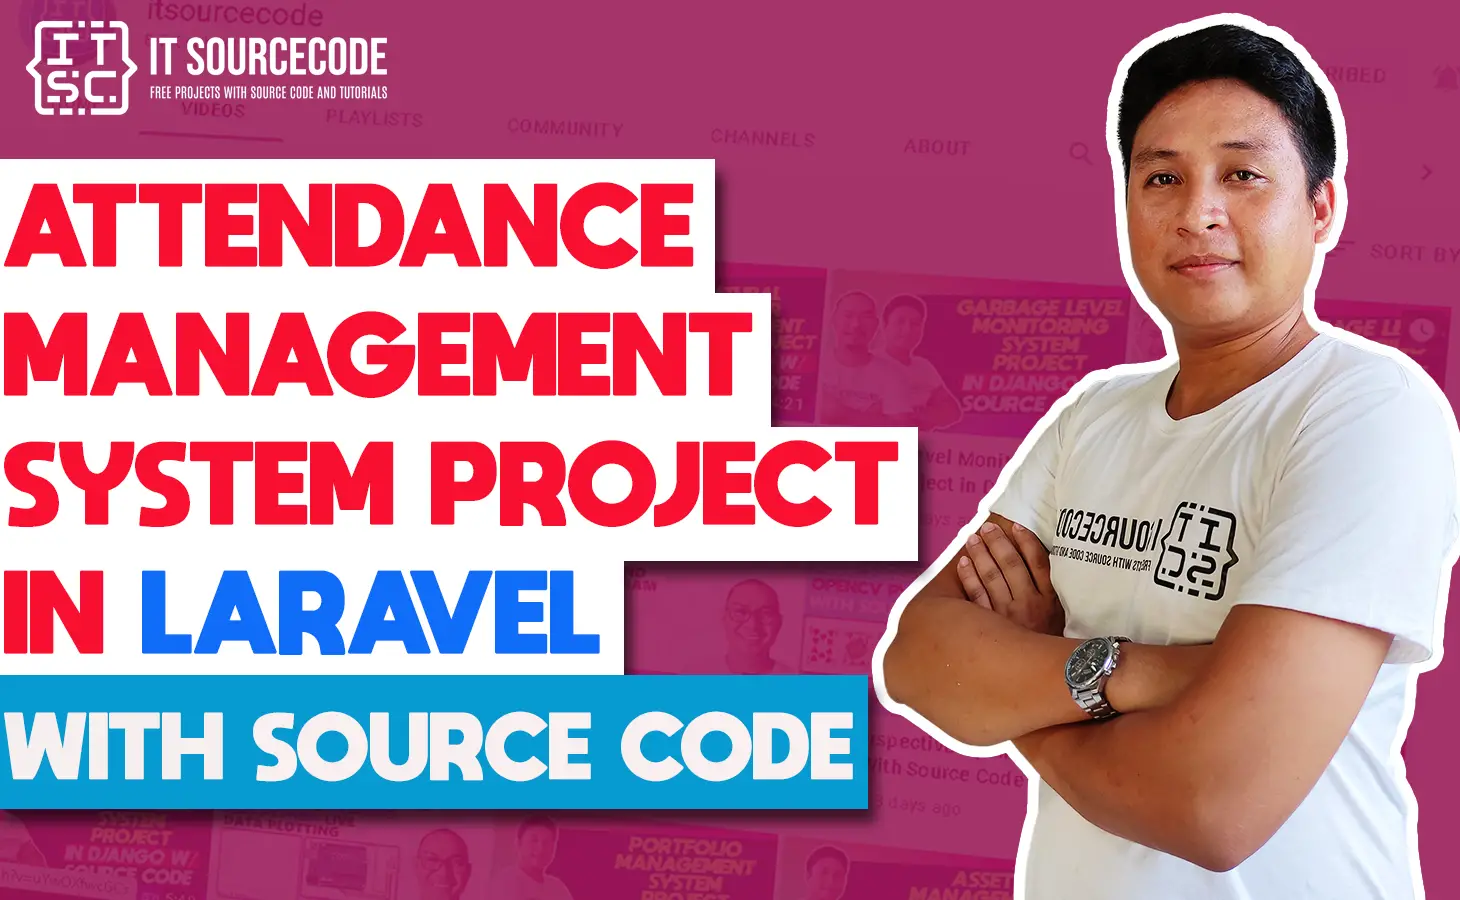 Attendance Management System Project in Laravel with Source Code